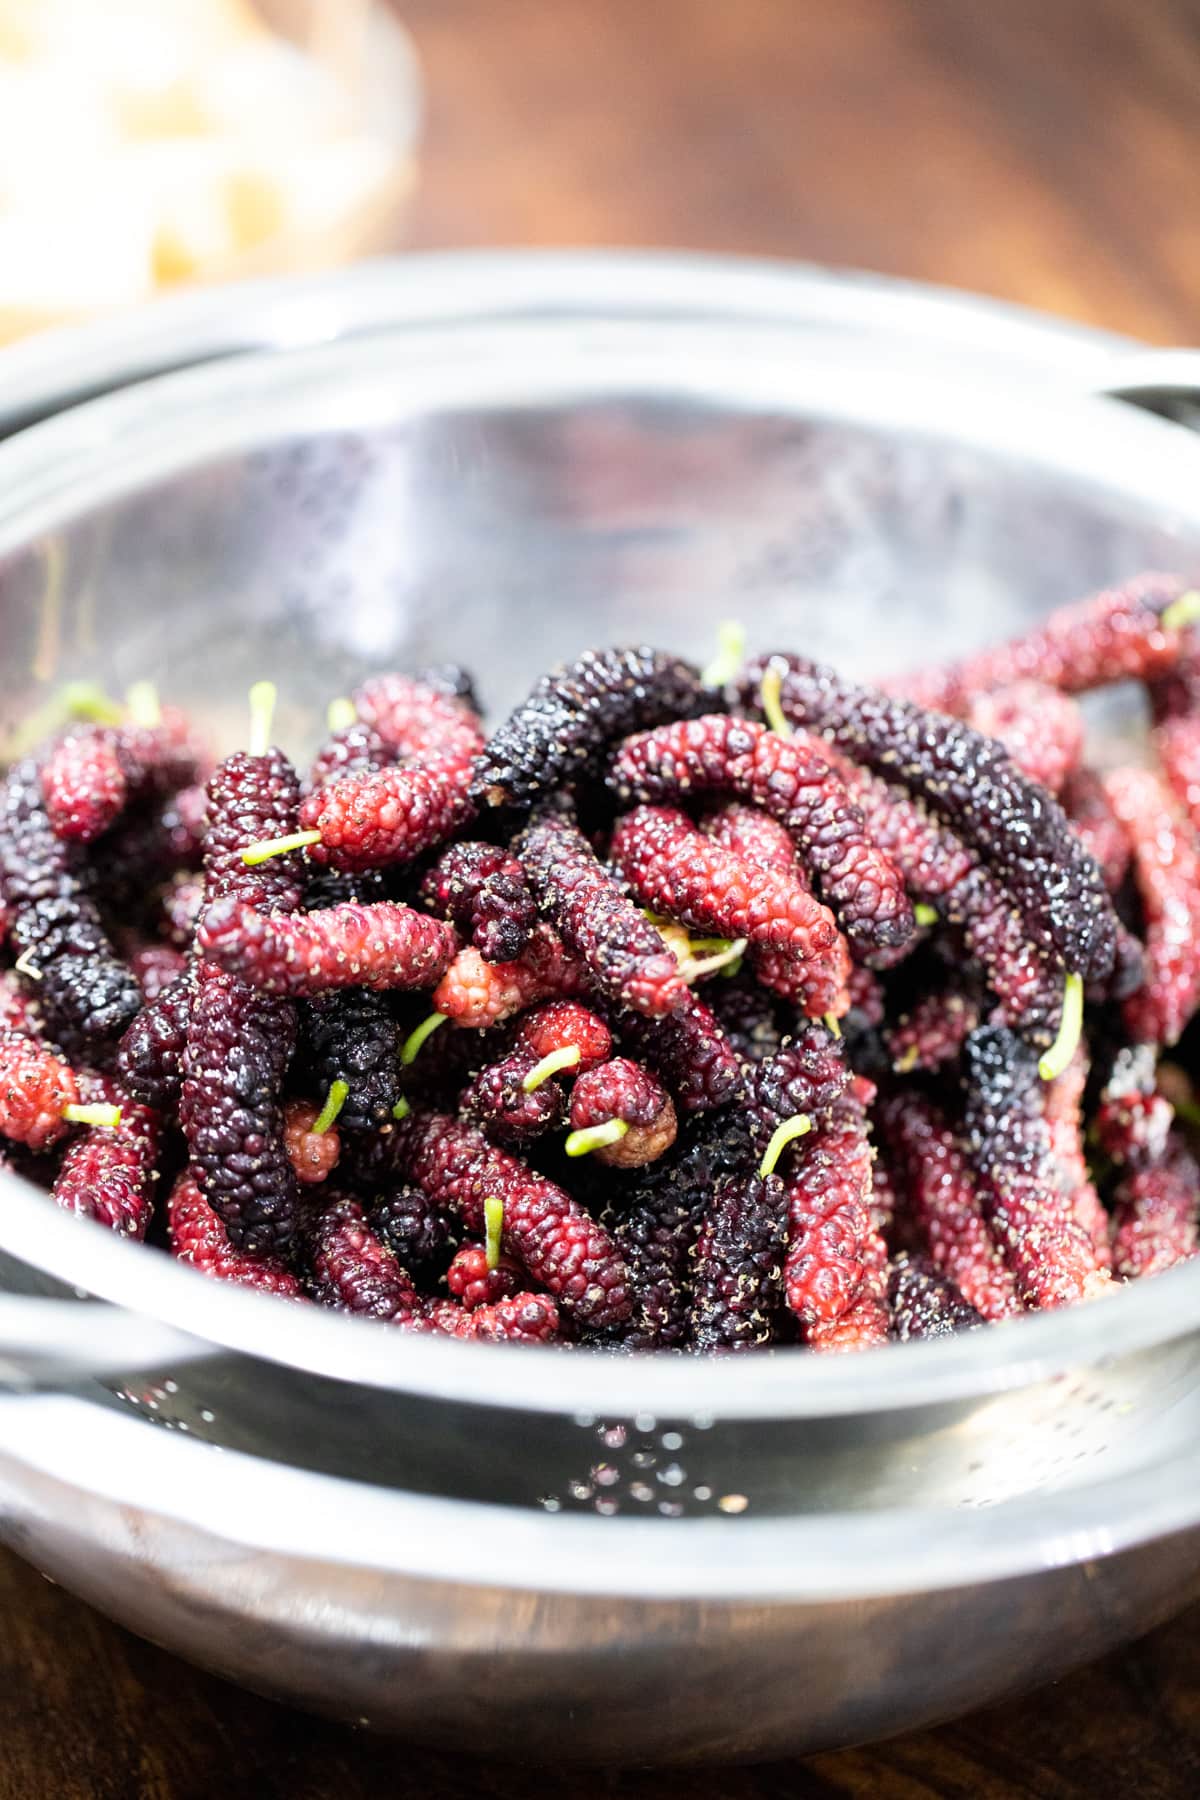 washing the mulberries